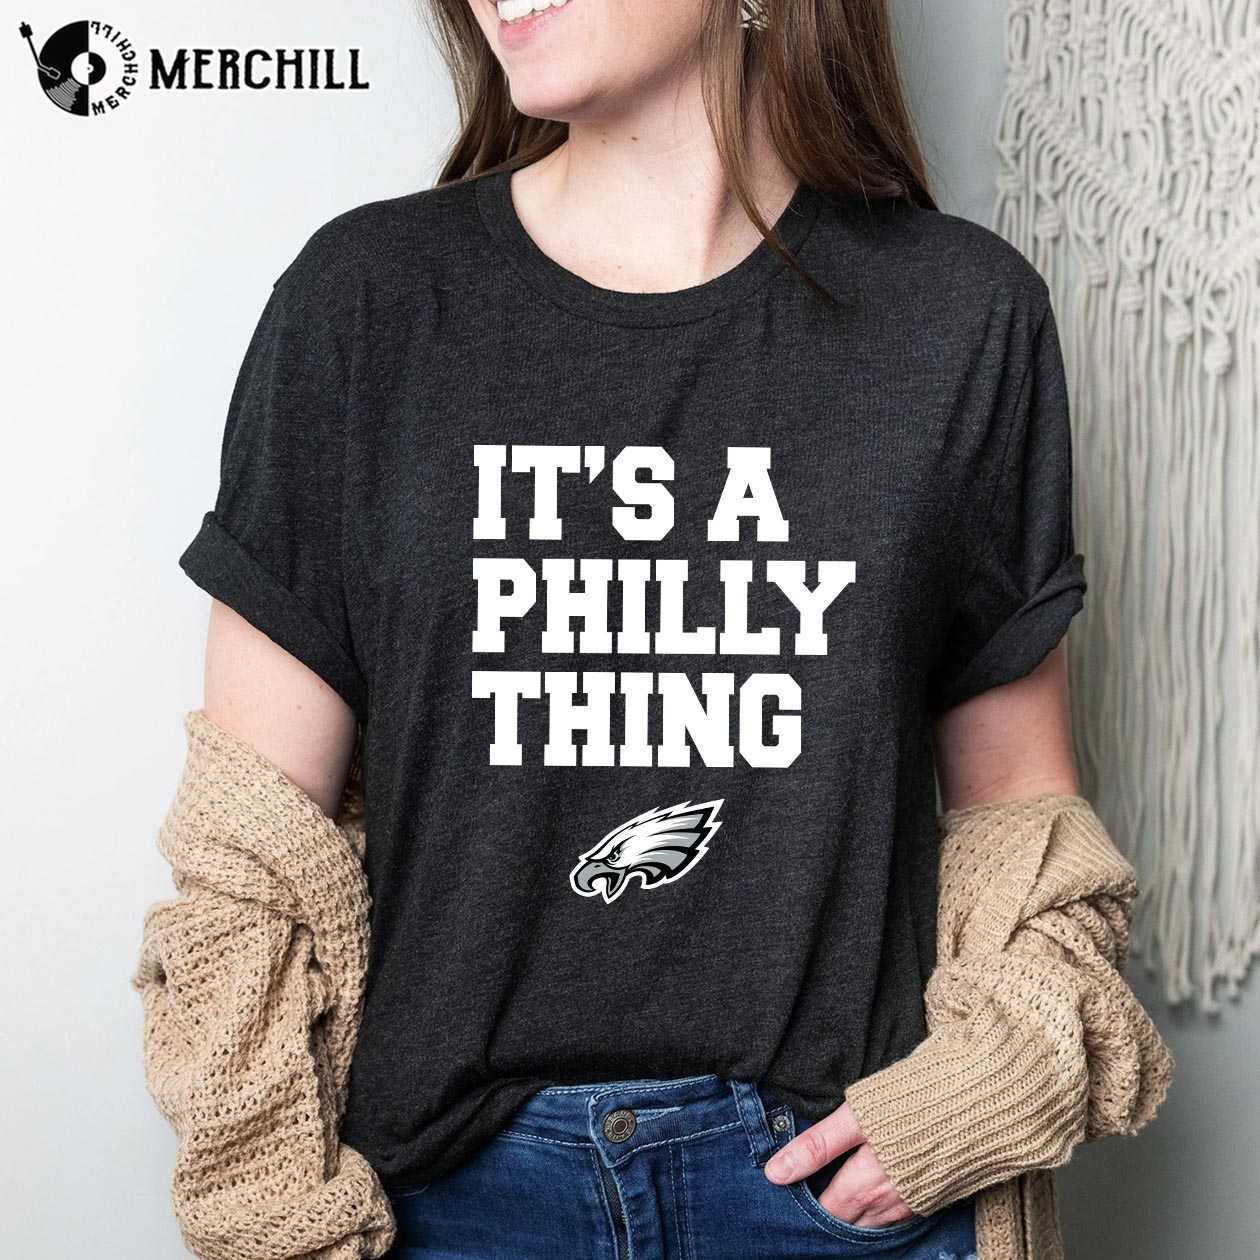  It's a Philly Thing Funny Women's Long Sleeve T-Shirt  Philadelphia Championship City of Brotherly Love Football League Fan :  Sports 